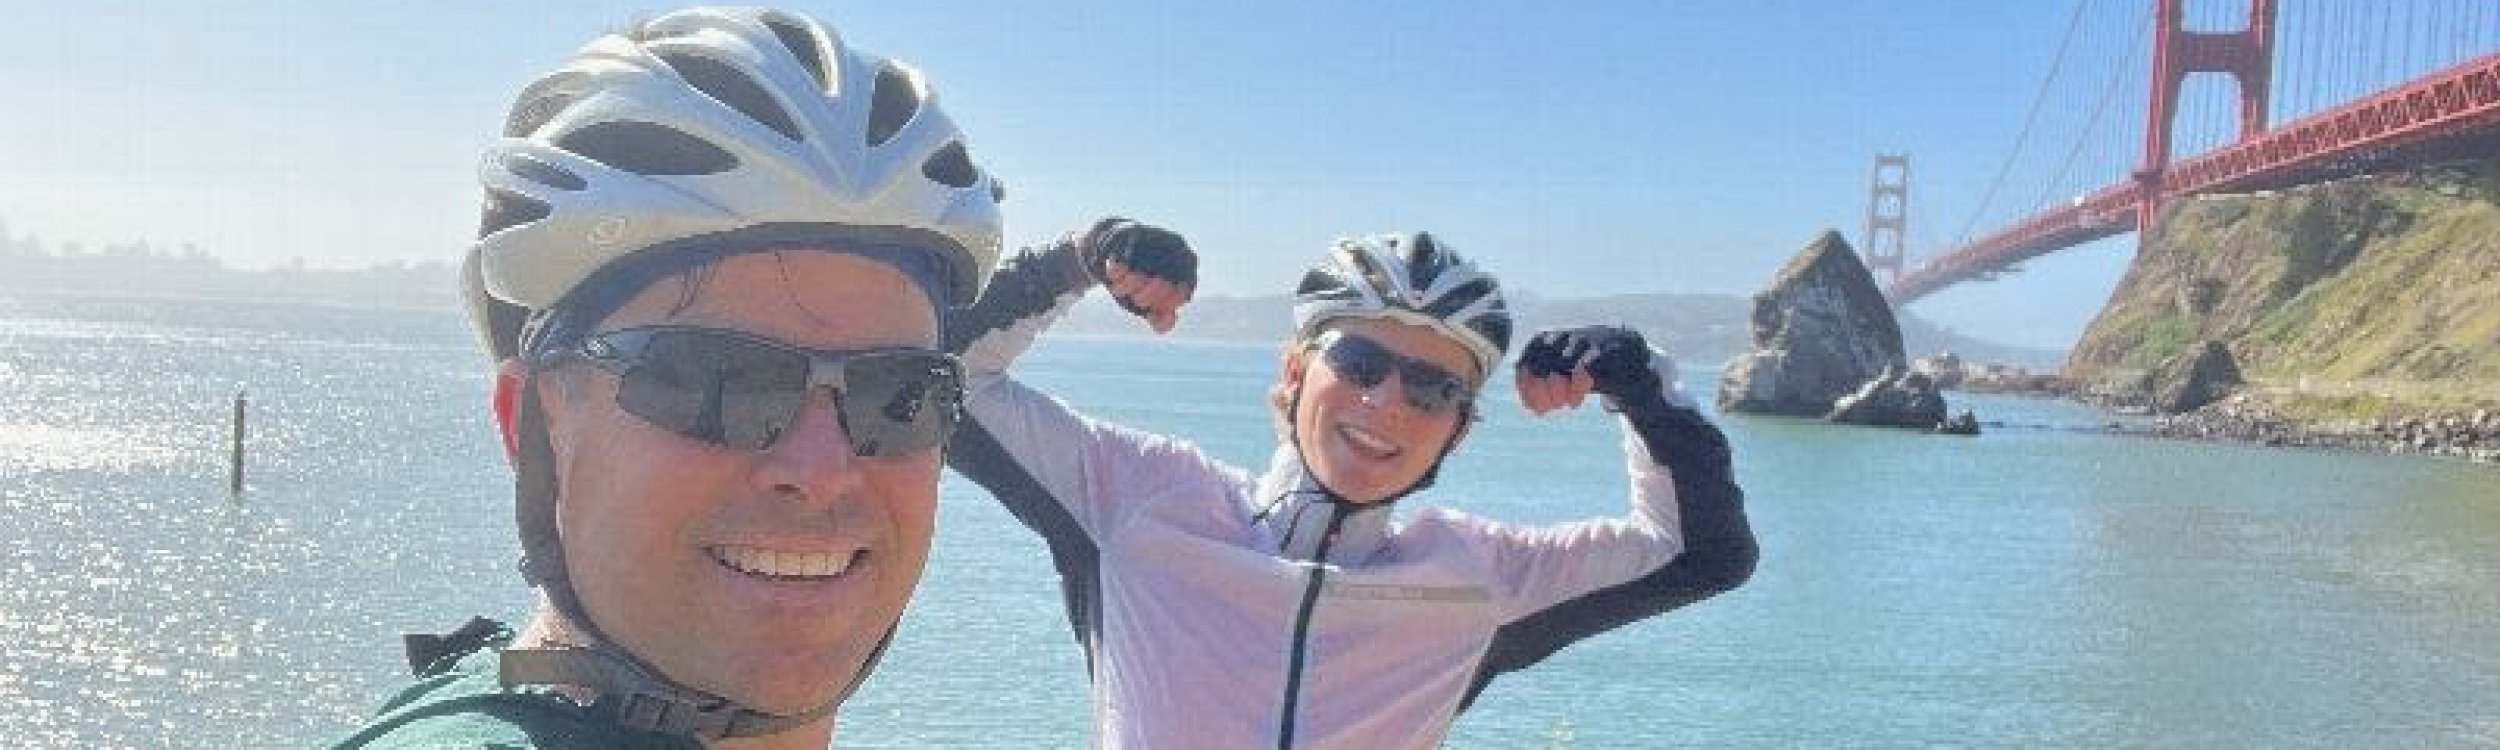 Matt’s favorite walks & why he’s supporting Walk SF through ClimateRide